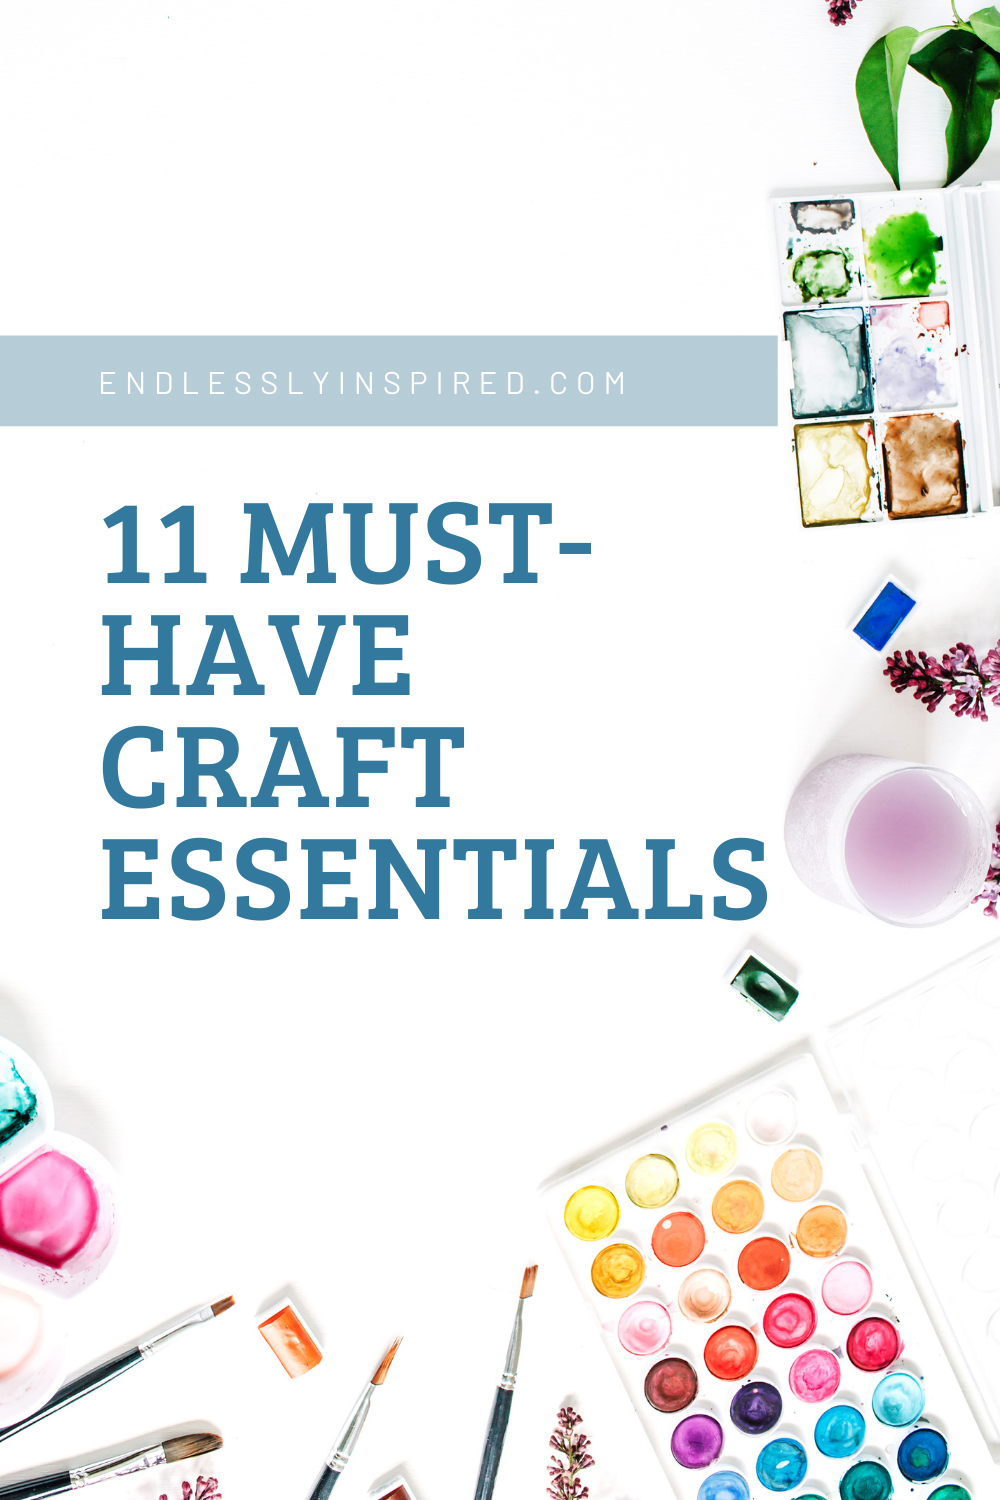 Kids Craft Supplies You Should Always Have on Hand